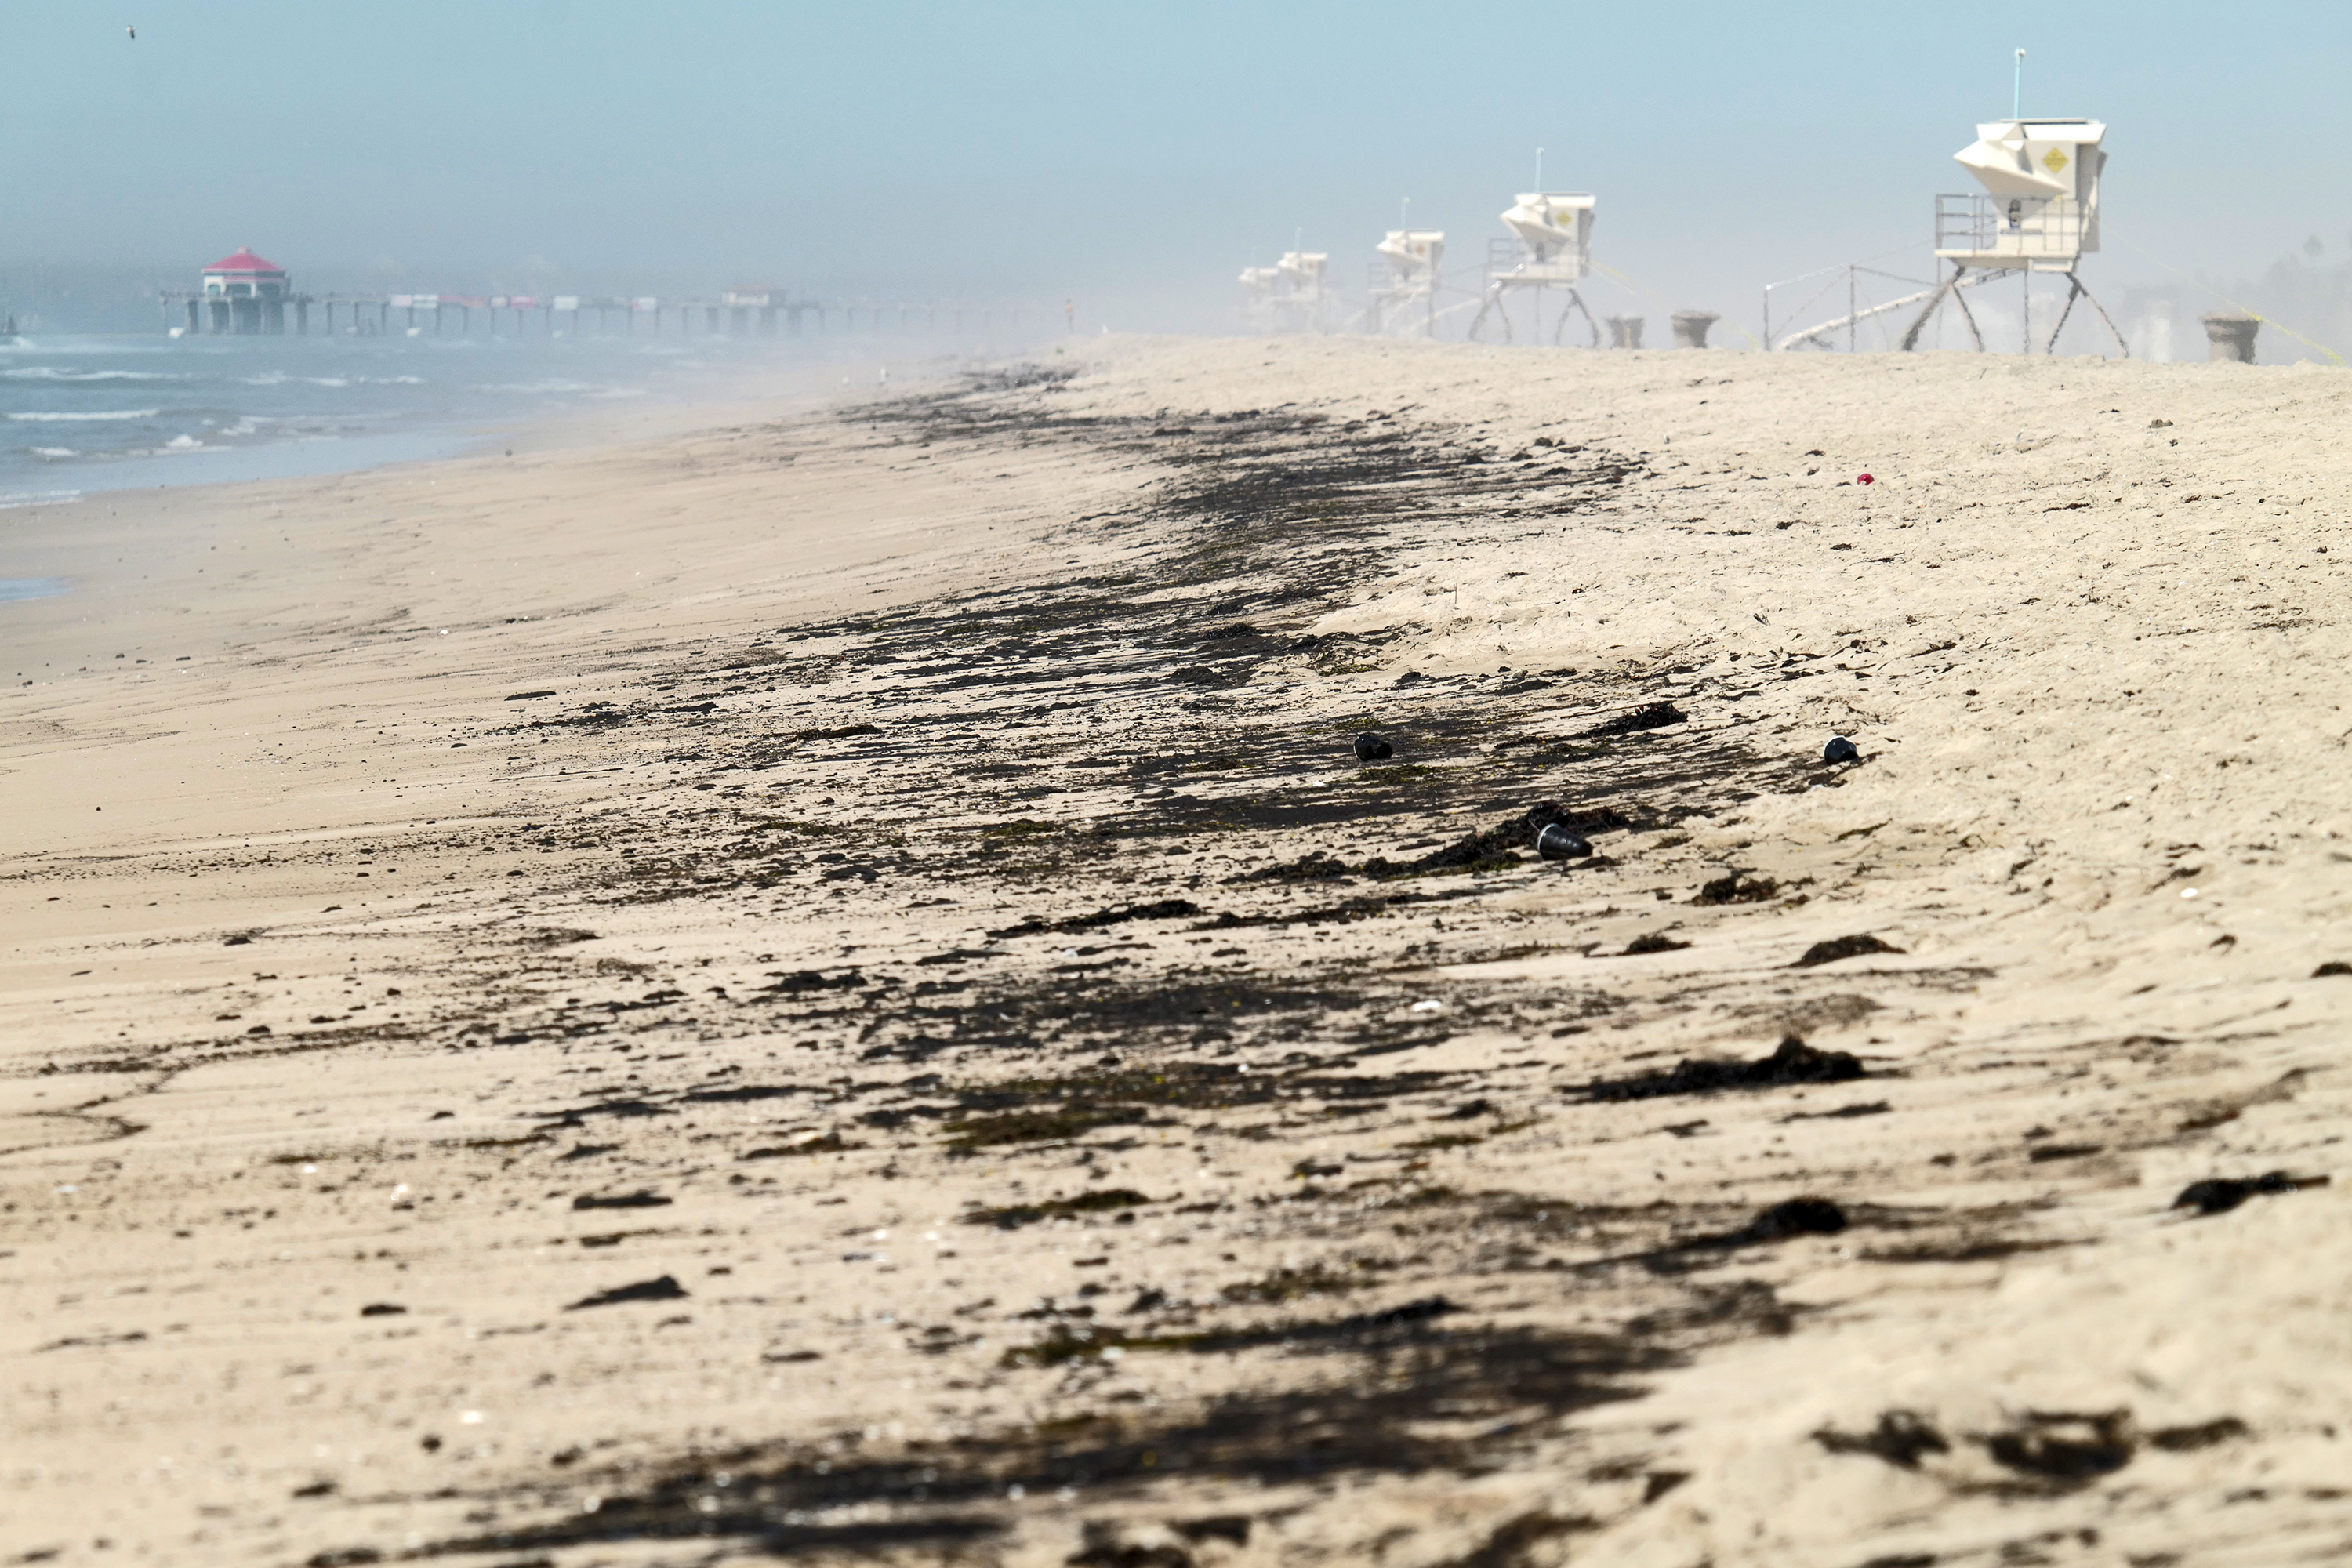 Huntington Beach Oil Spill: Houston-Based Amplify Energy Owns Rig That Spilled Oil Into Waters Off Orange County